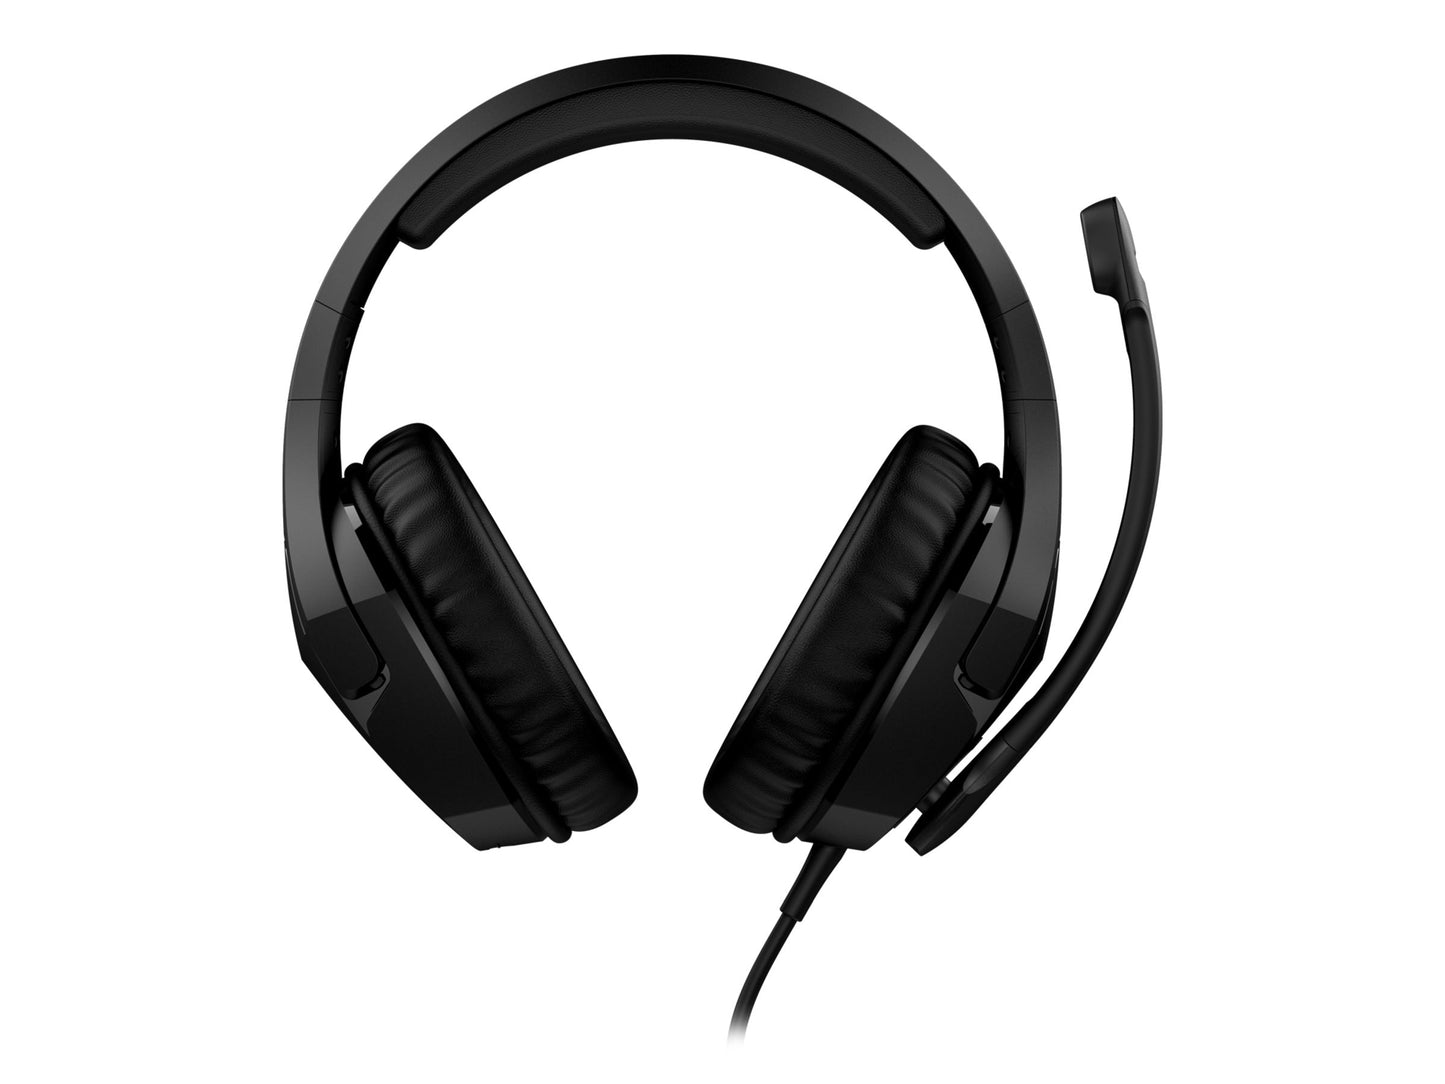 HyperX Cloud Stinger S 7.1 Gaming Headset for PC